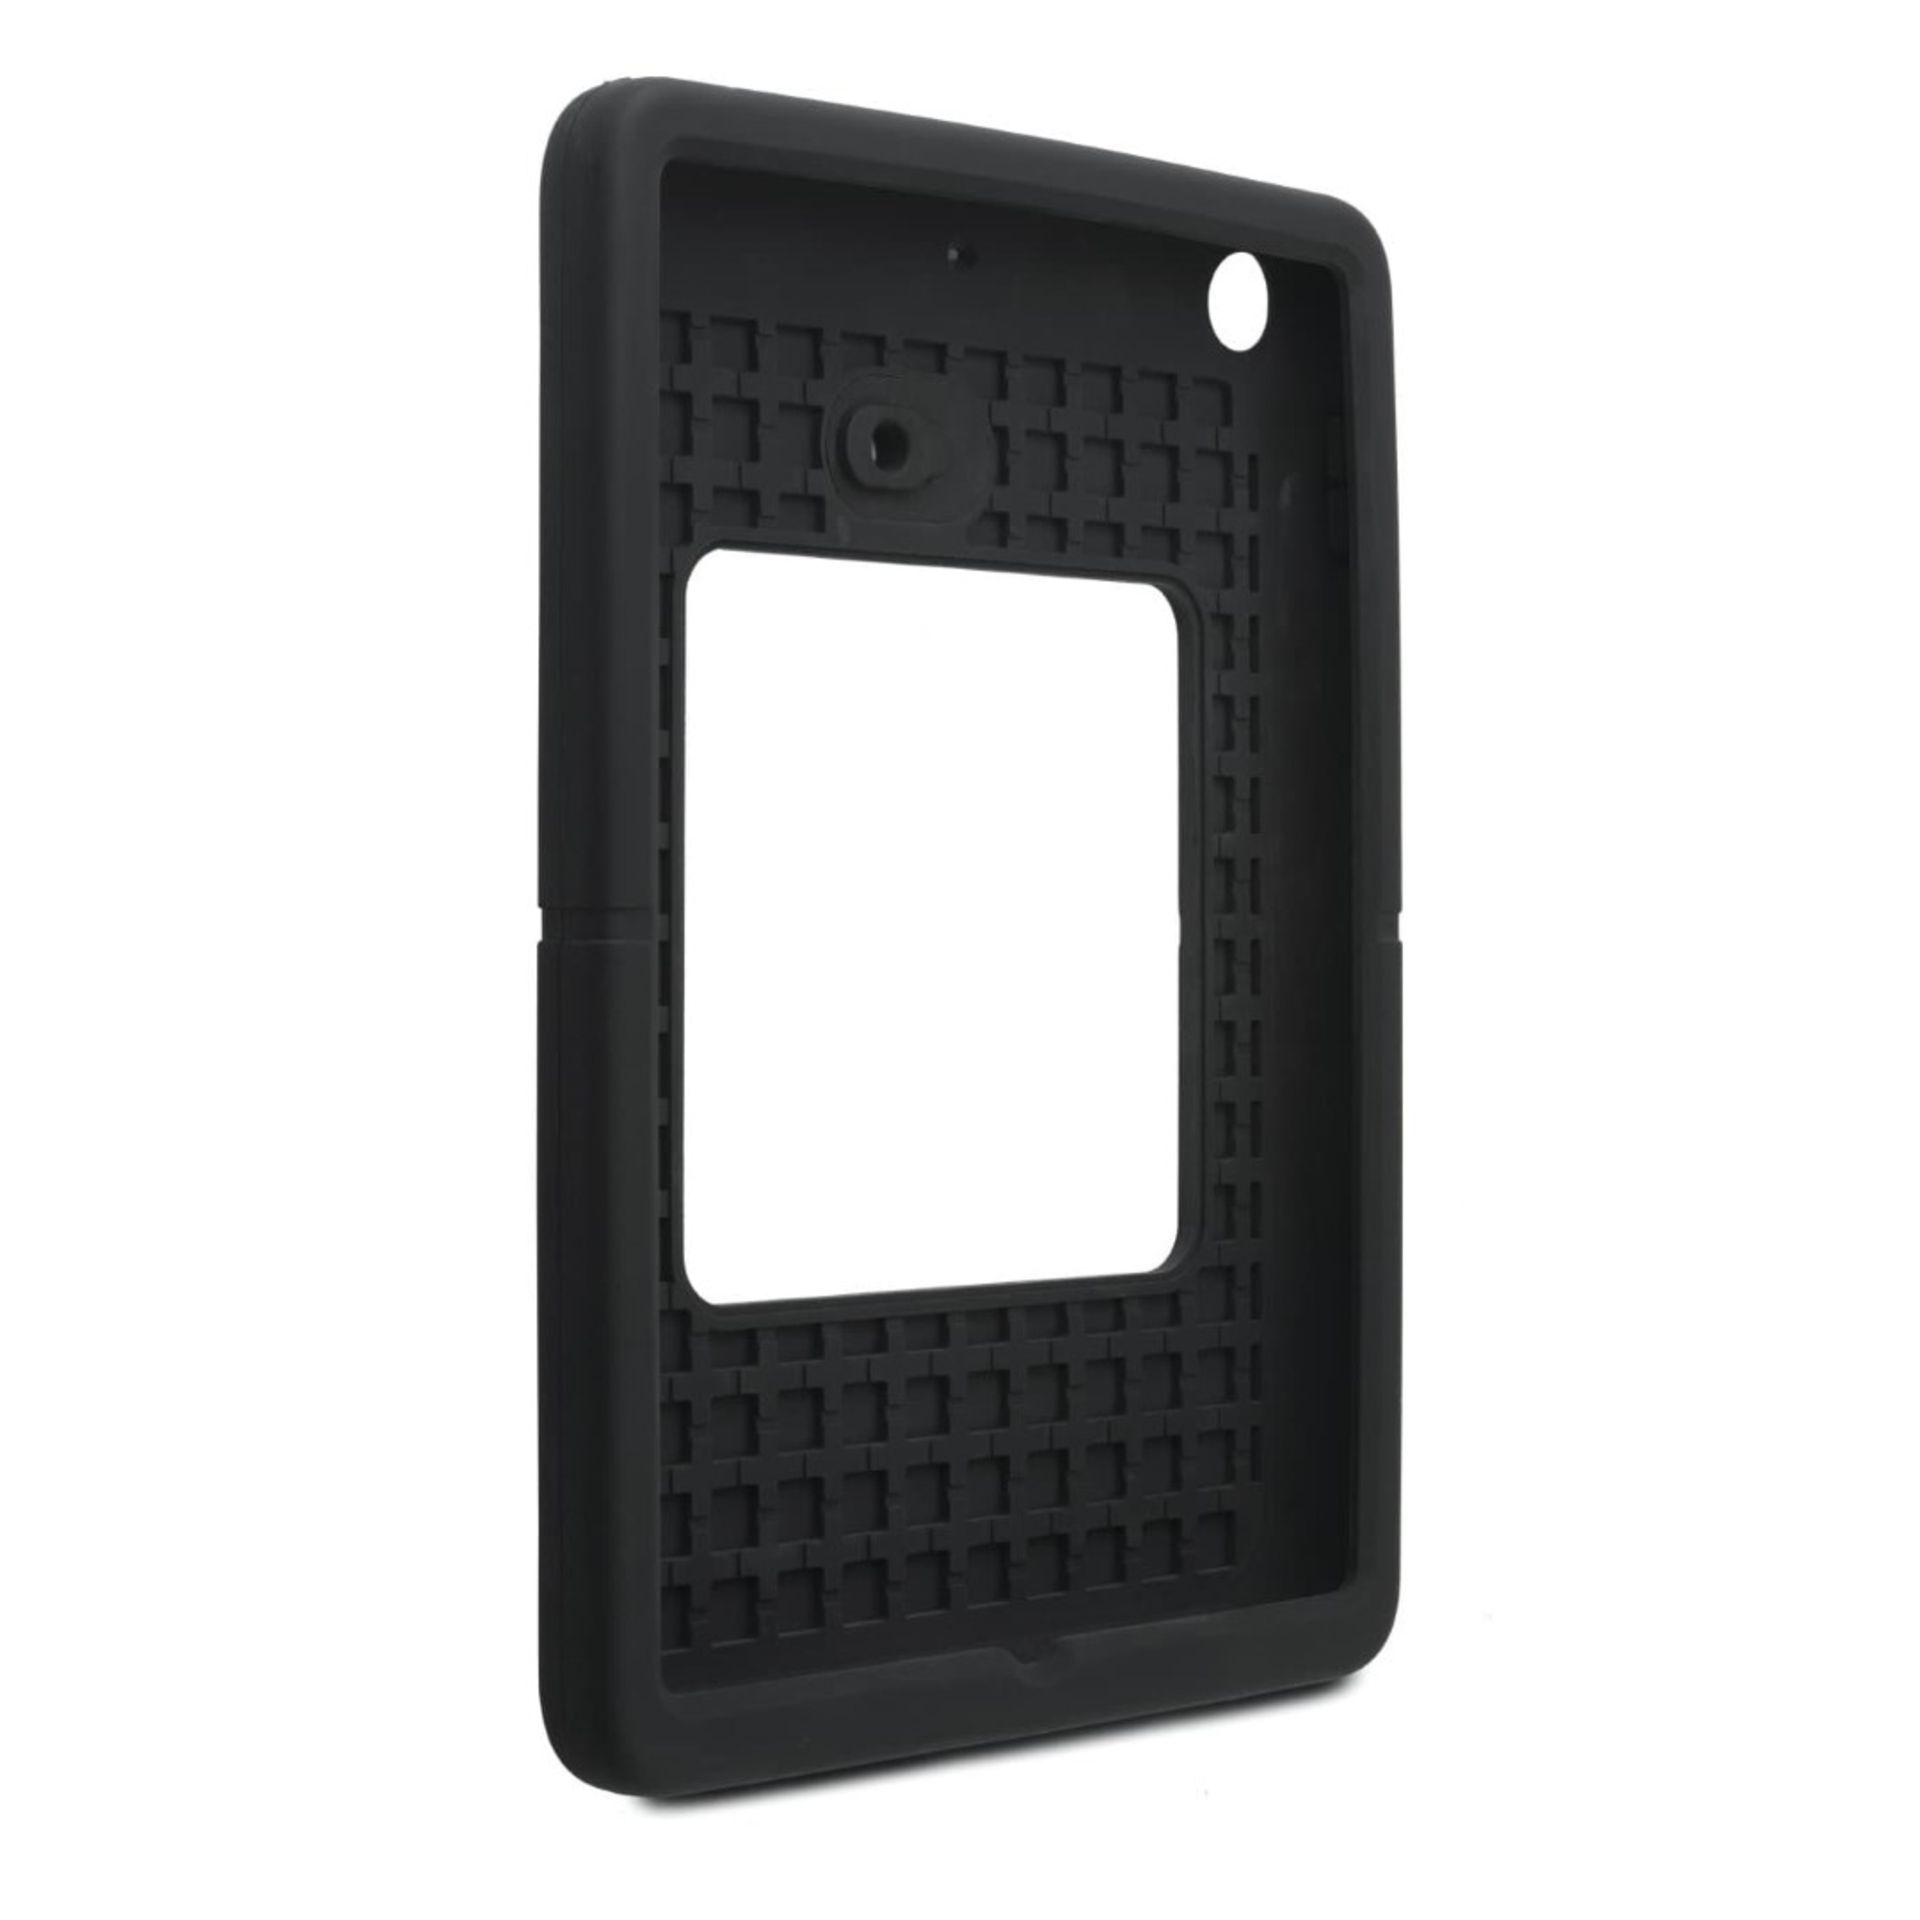 5 x Kensington Ipad Air Rugged Protection Cases - Provides Maximum Protection to Vulnerable - Image 6 of 6